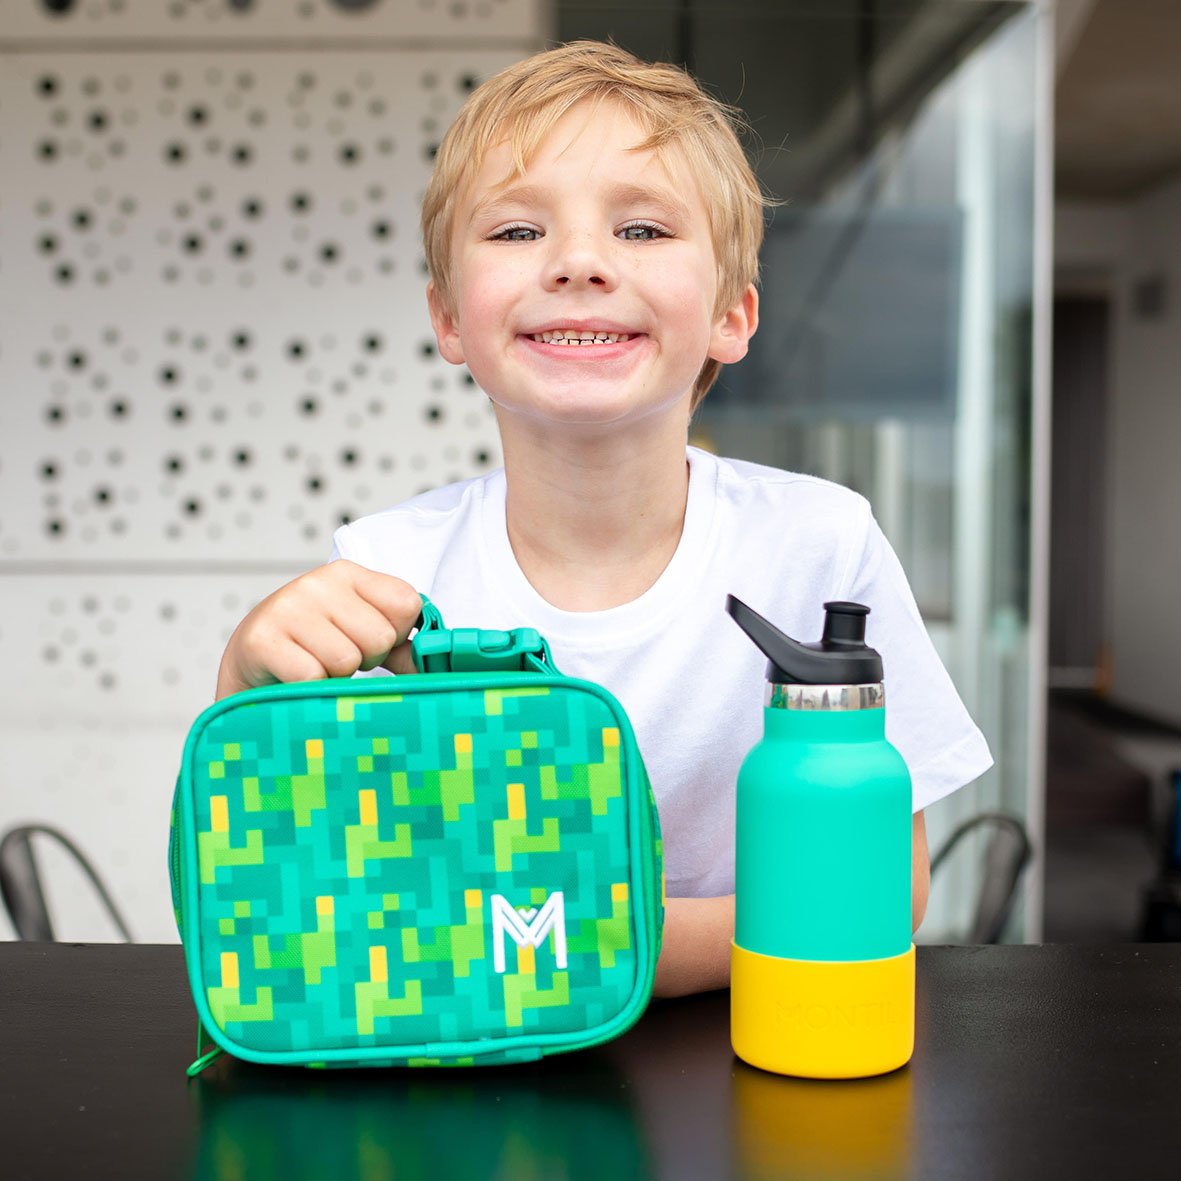 Montii | Insulated Lunch Bag - Mini